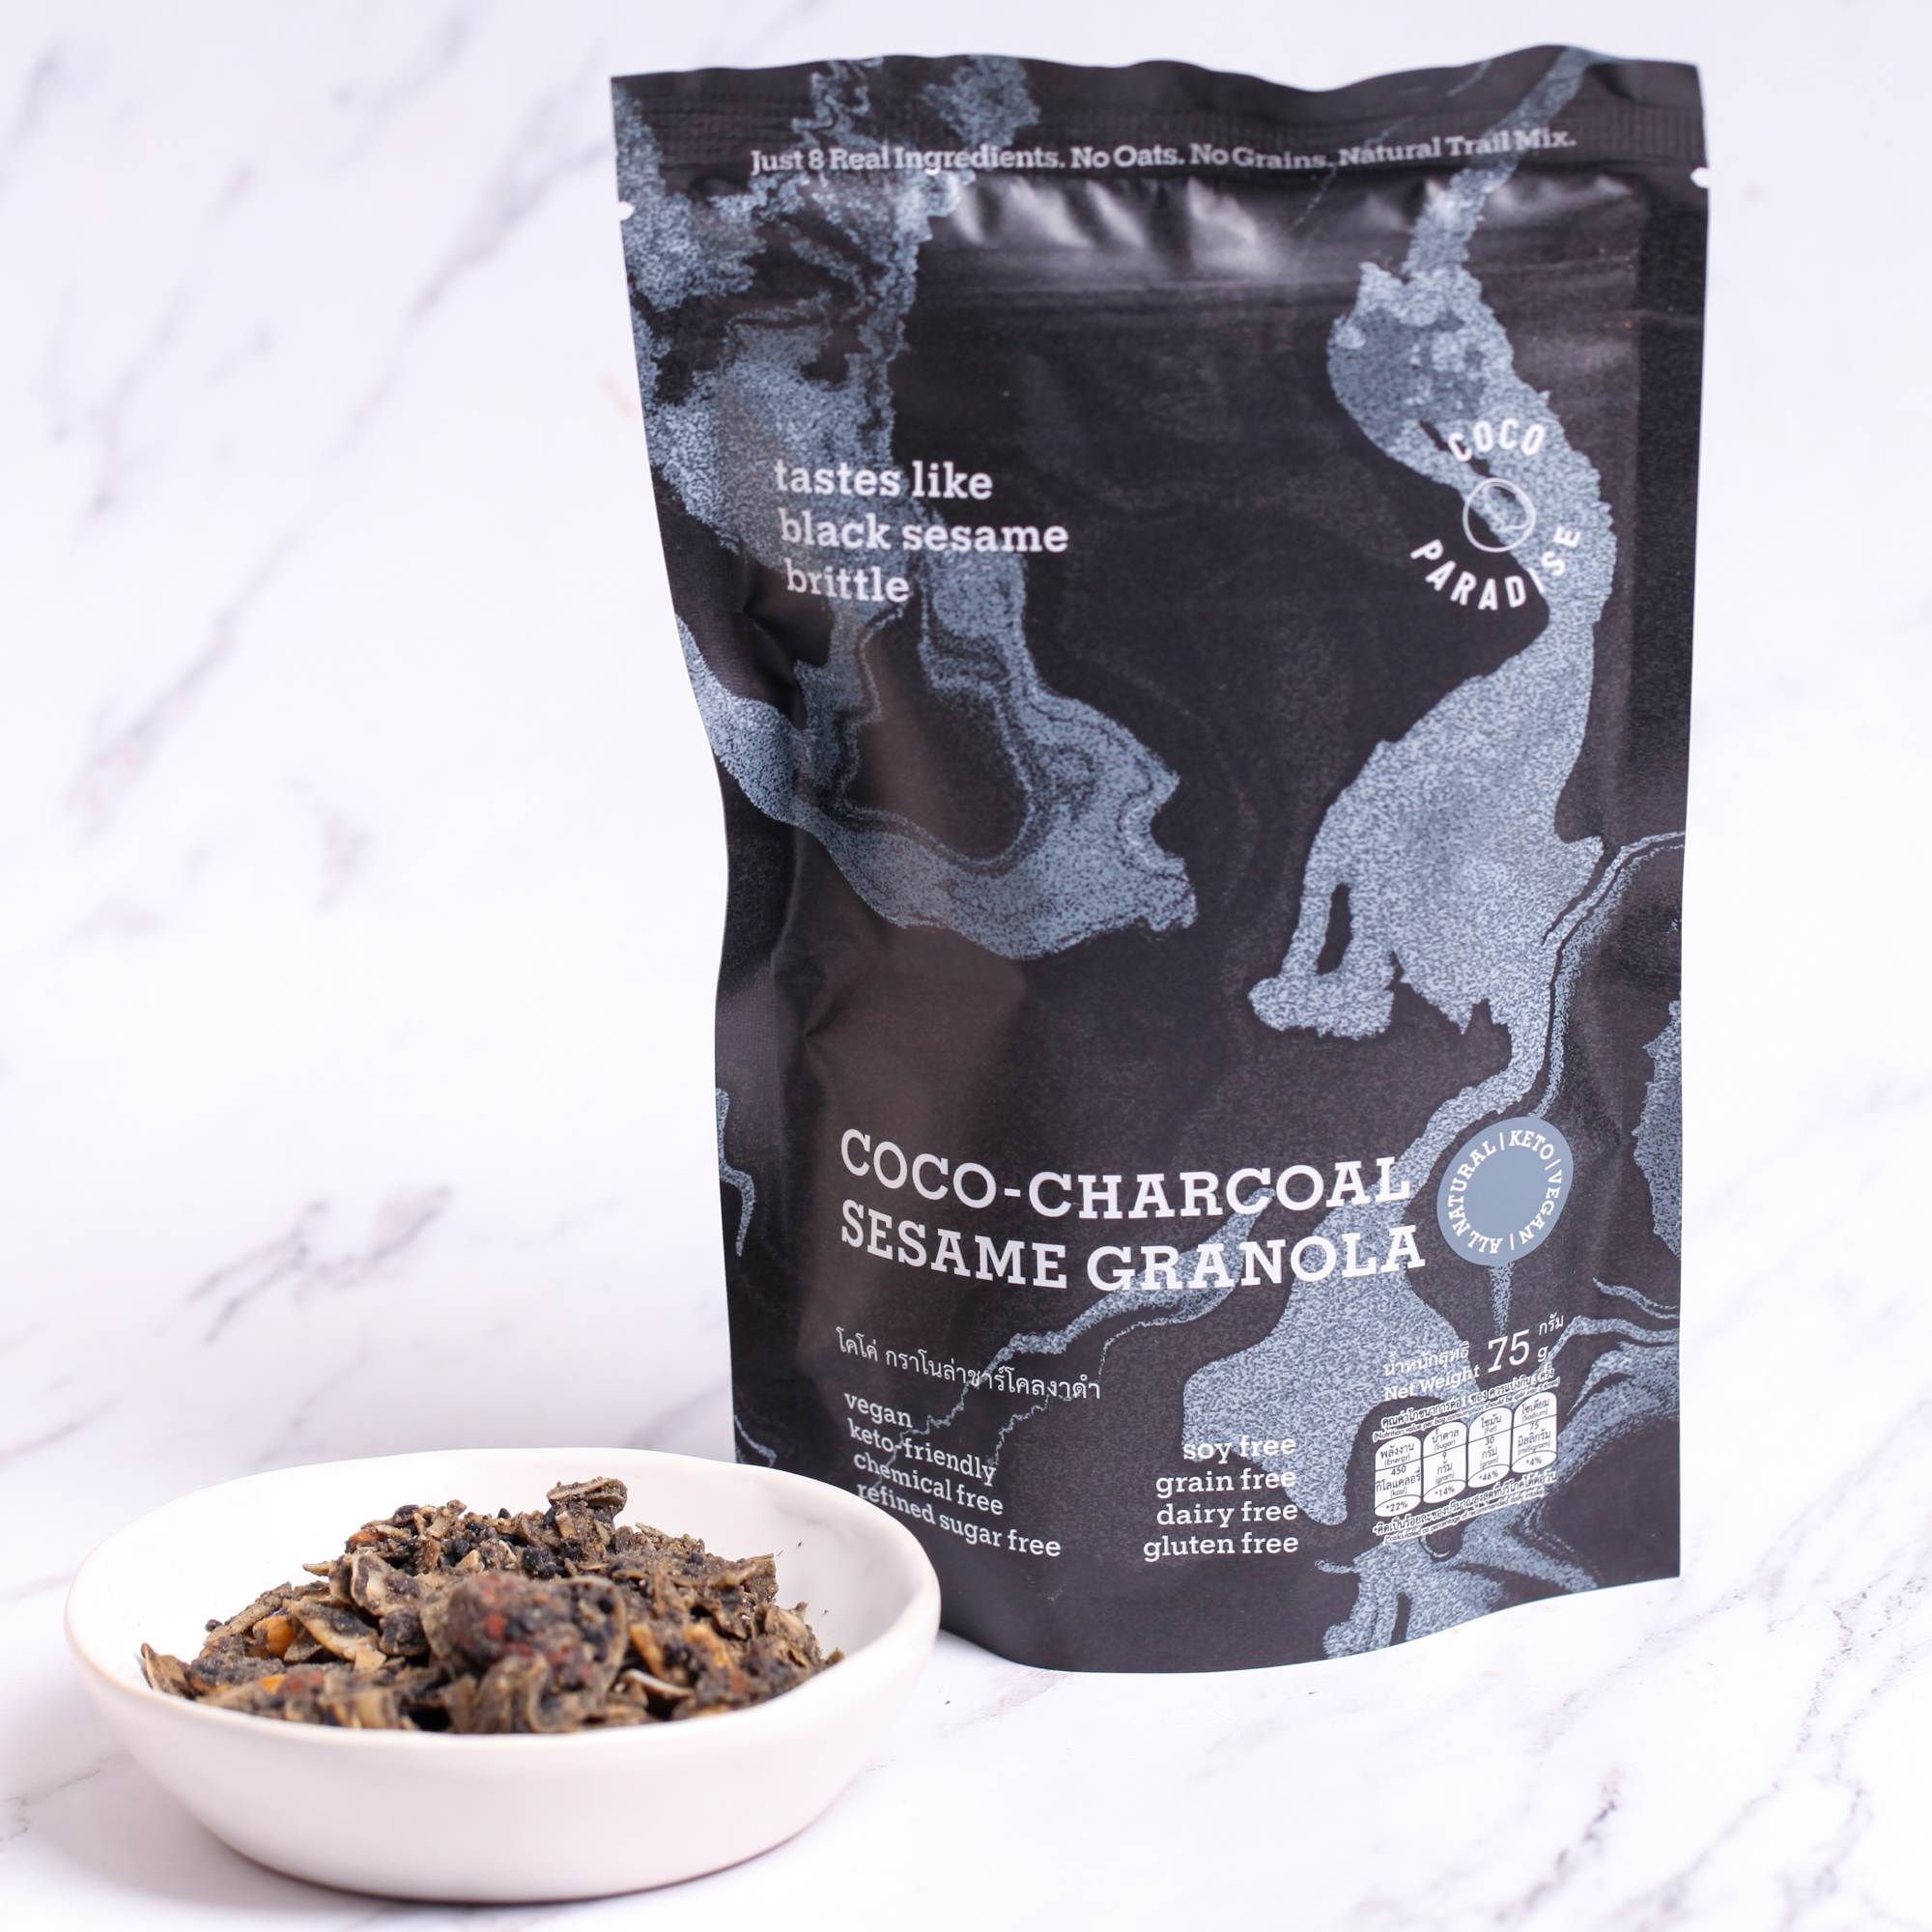 Coco-Charcoal Sesame Granola by Coco Paradise